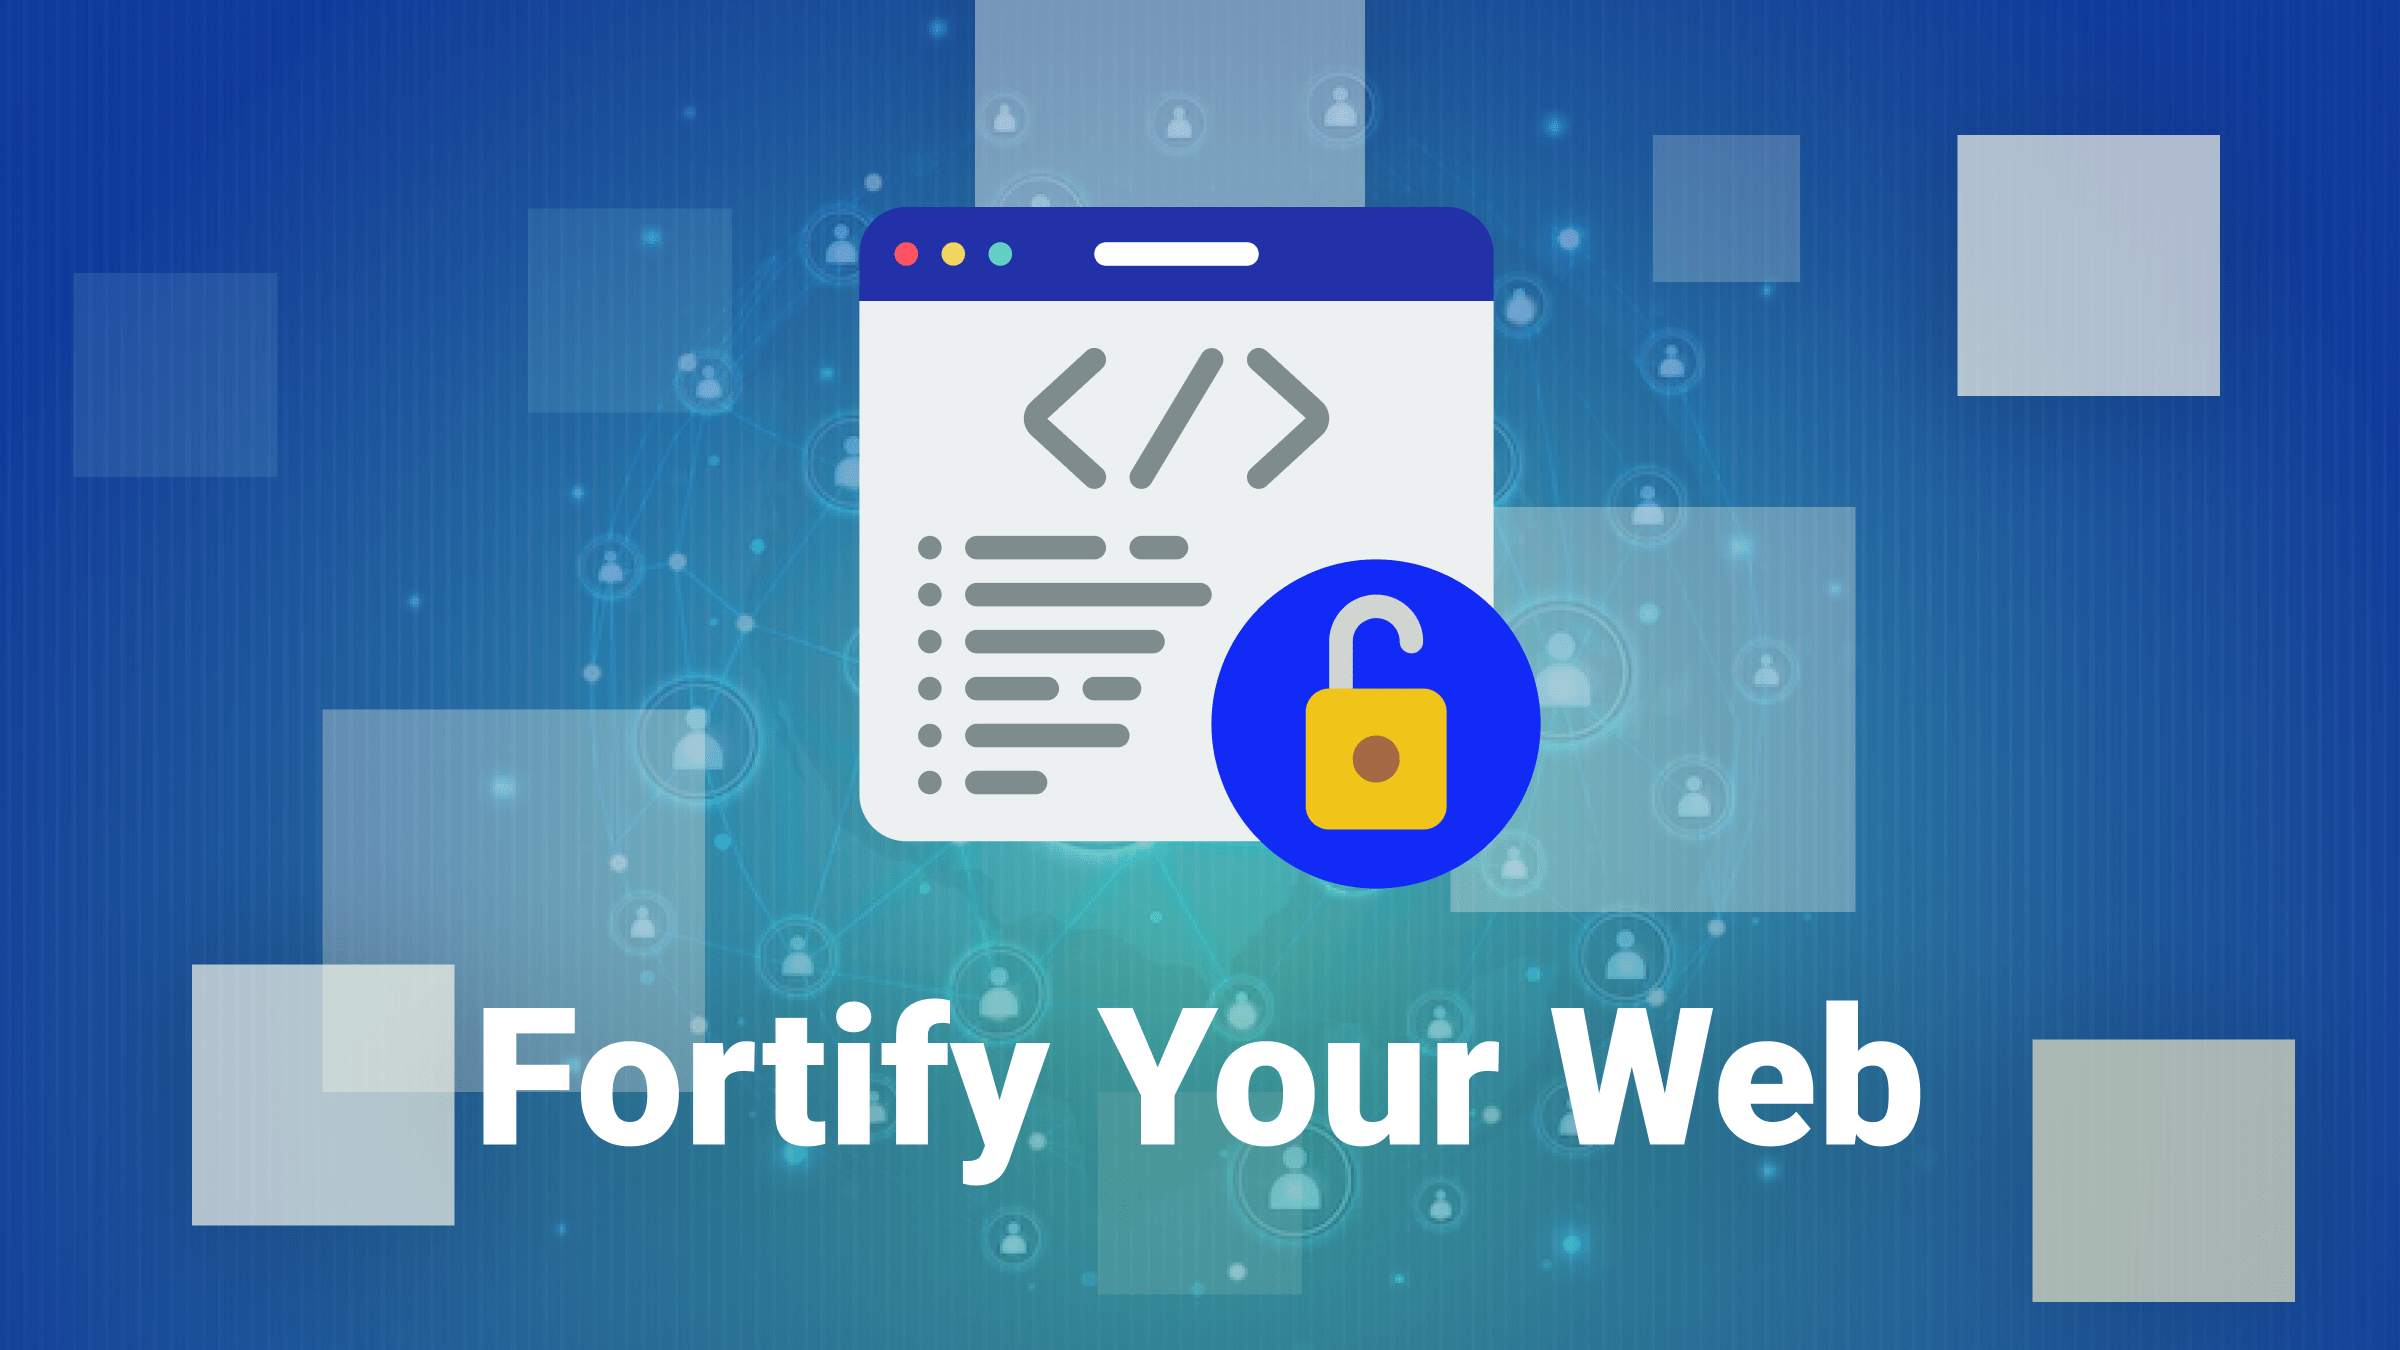 Fortify your web: 7 Essential Security Protocols